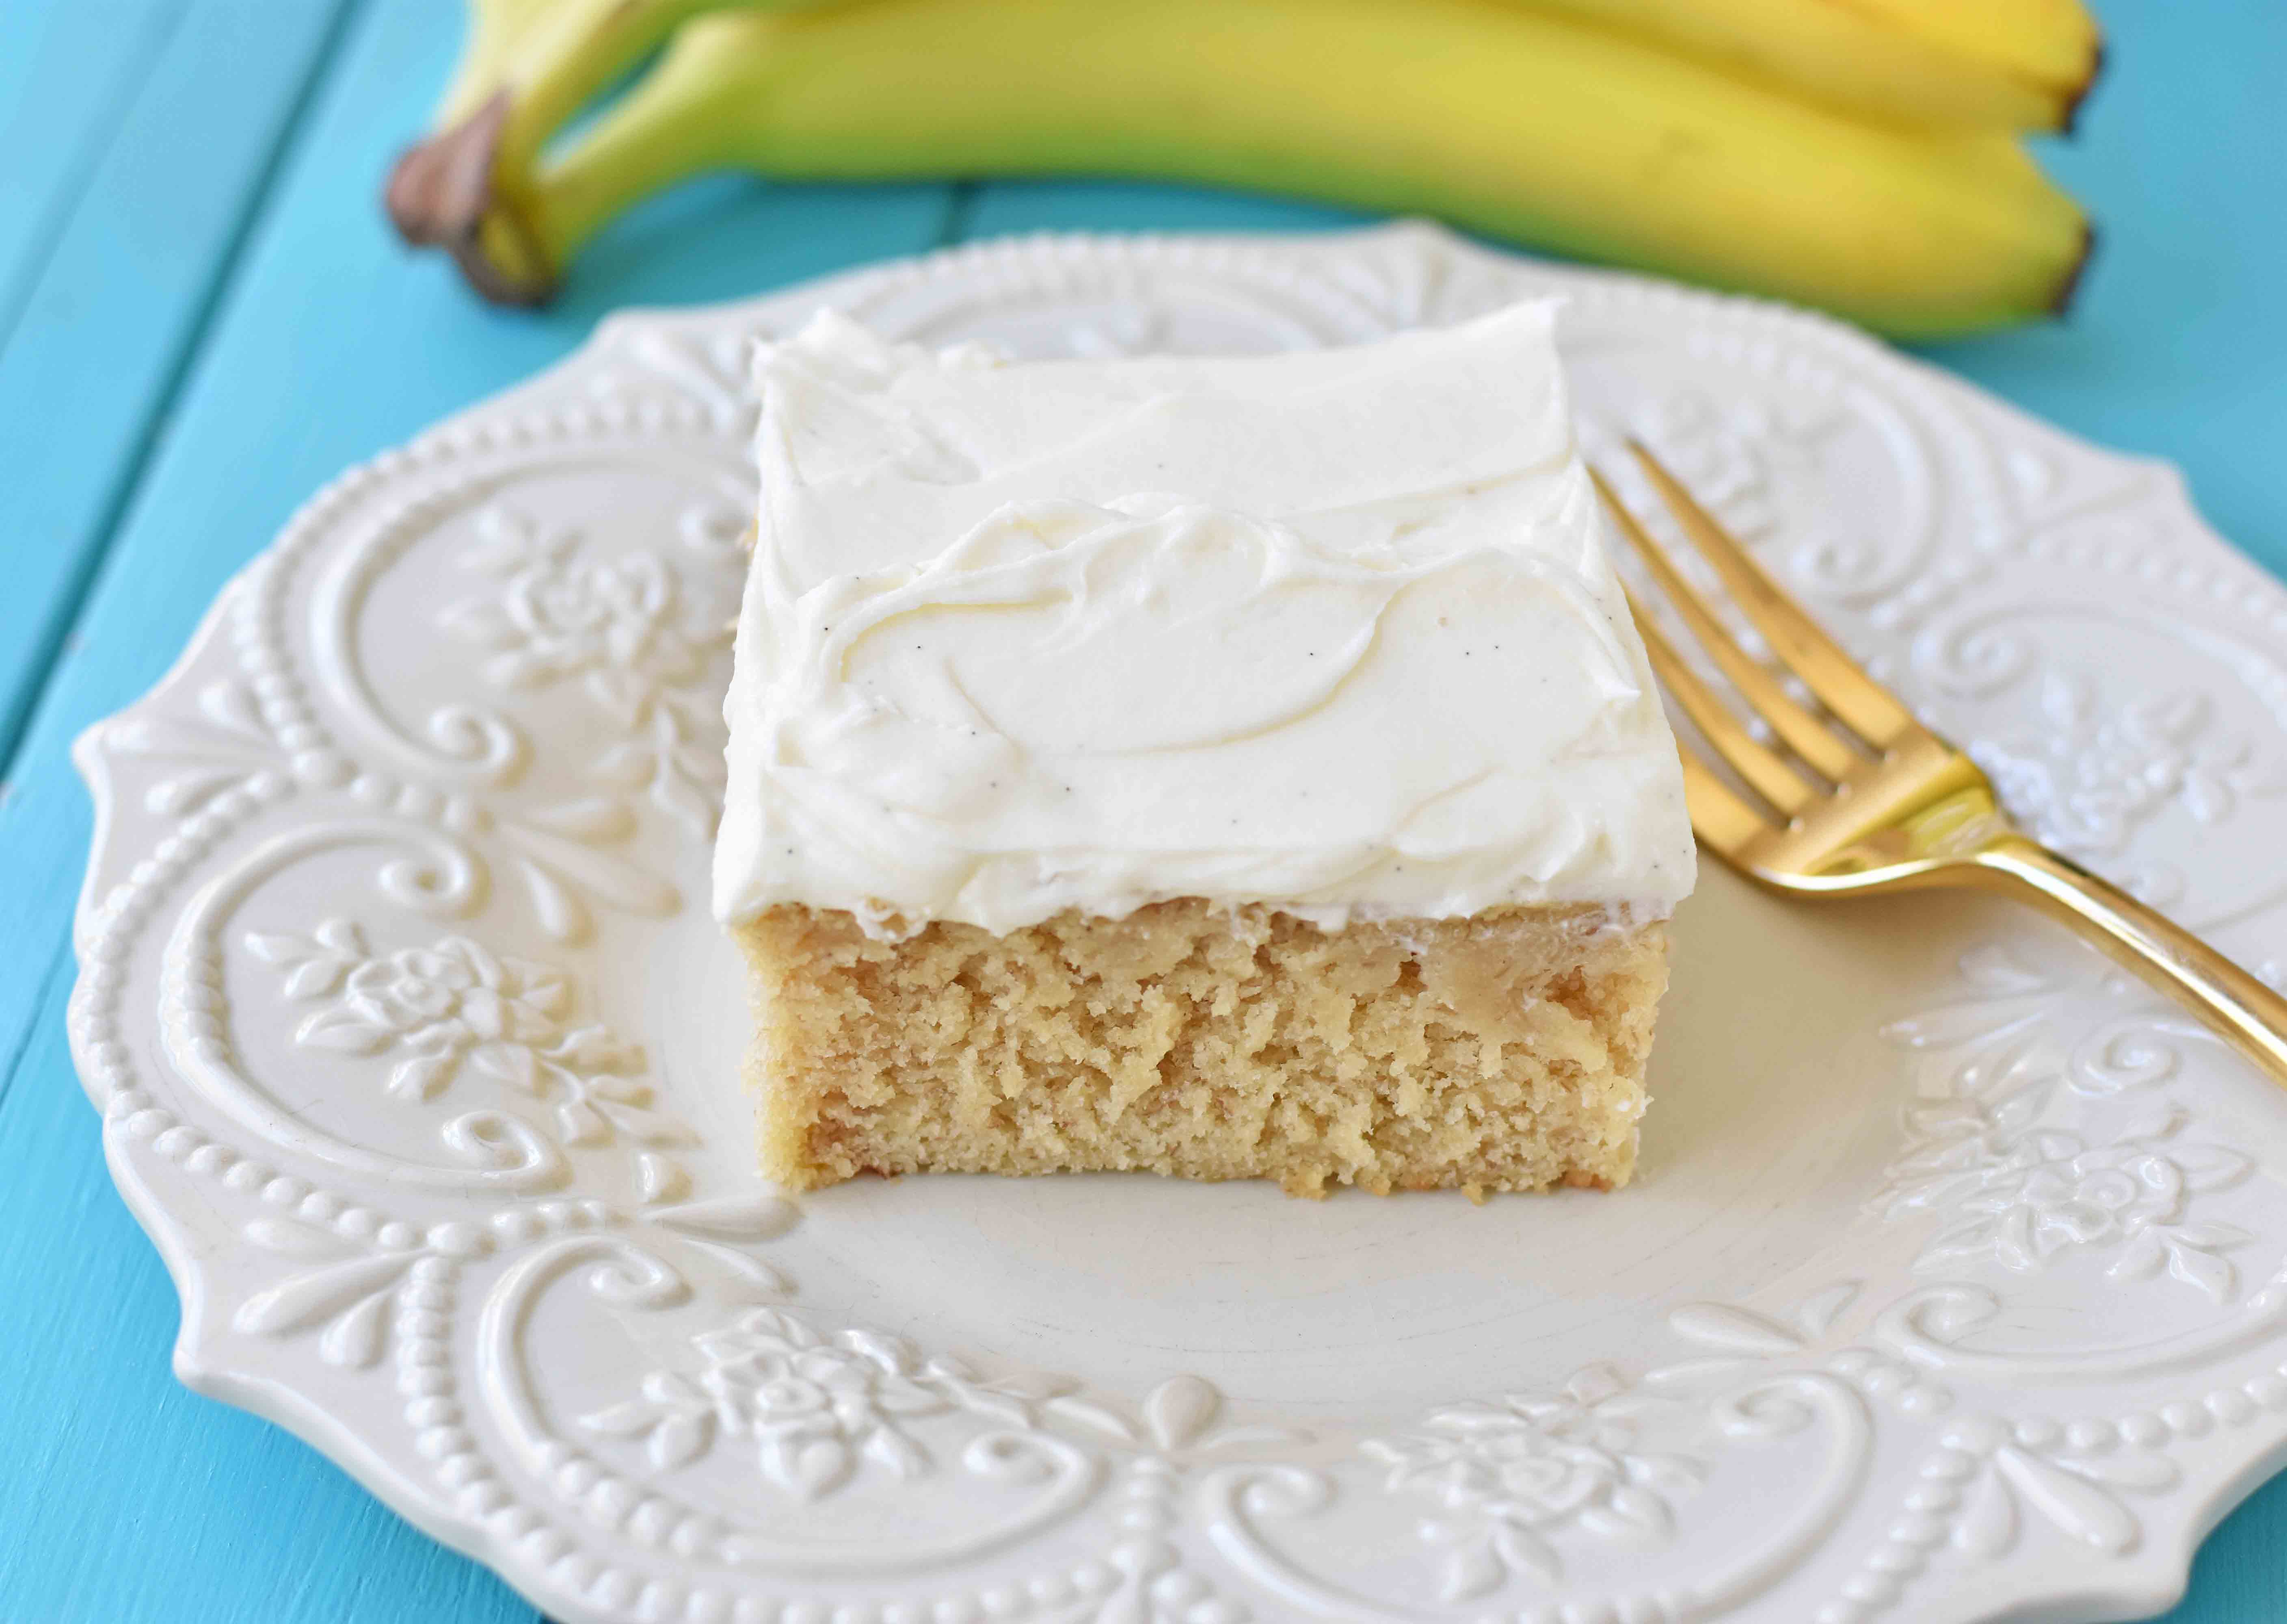 Jeff's BEST Banana Cake Recipe. This moist and tender banana cake is topped with a sweet and buttery cream cheese frosting. This is the best banana cake I have ever had and the only recipe I need. This banana cake with cream cheese frosting will knock your socks off! www.modernhoney.com